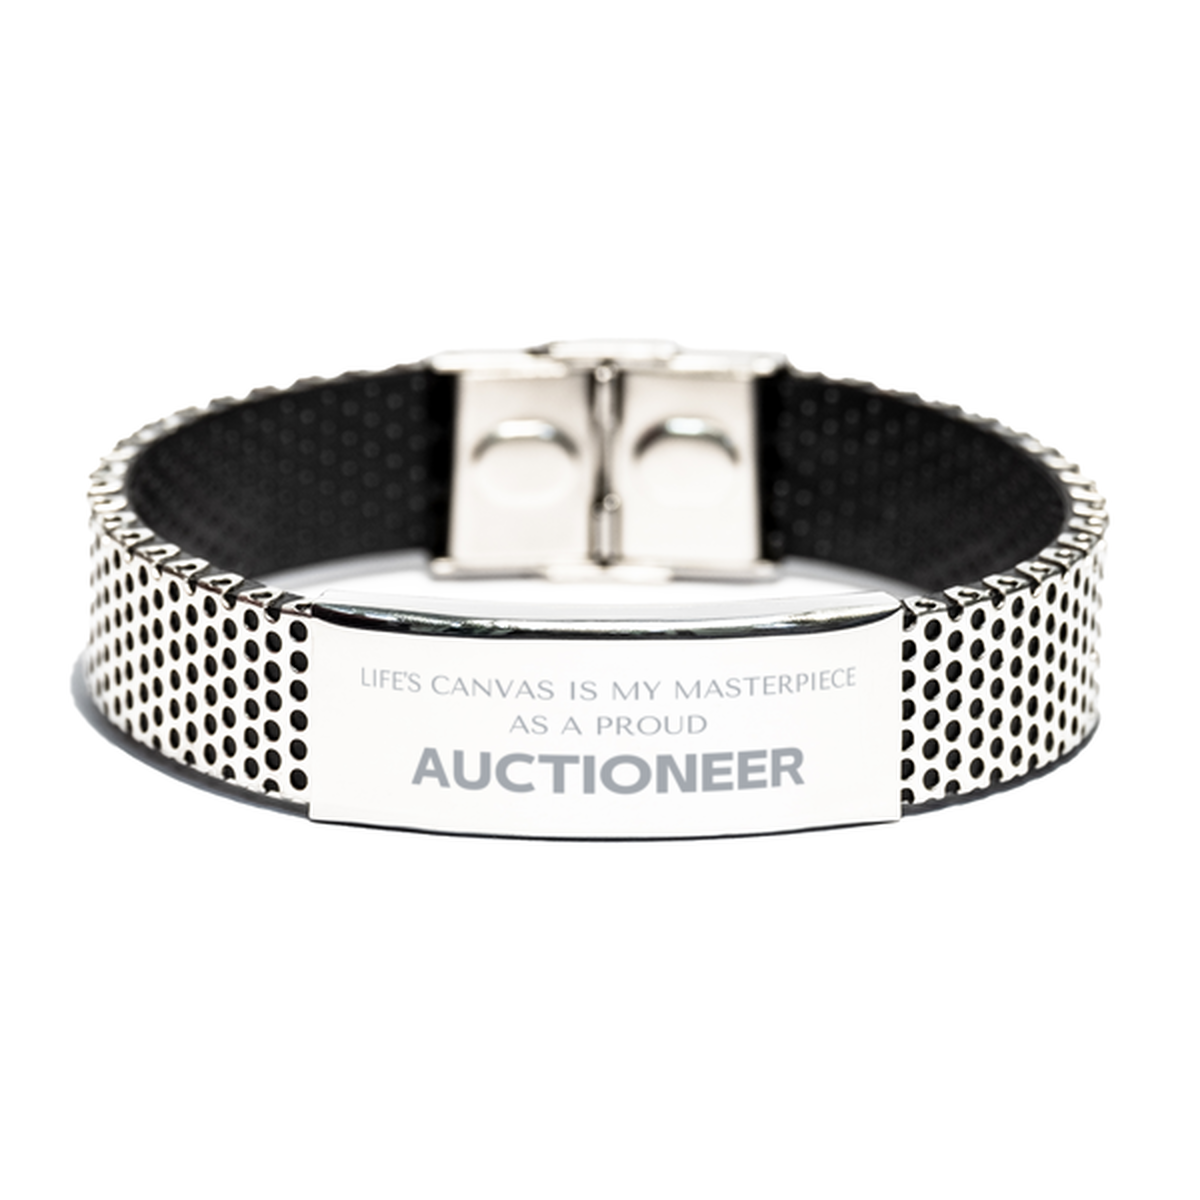 Proud Auctioneer Gifts, Life's canvas is my masterpiece, Epic Birthday Christmas Unique Stainless Steel Bracelet For Auctioneer, Coworkers, Men, Women, Friends